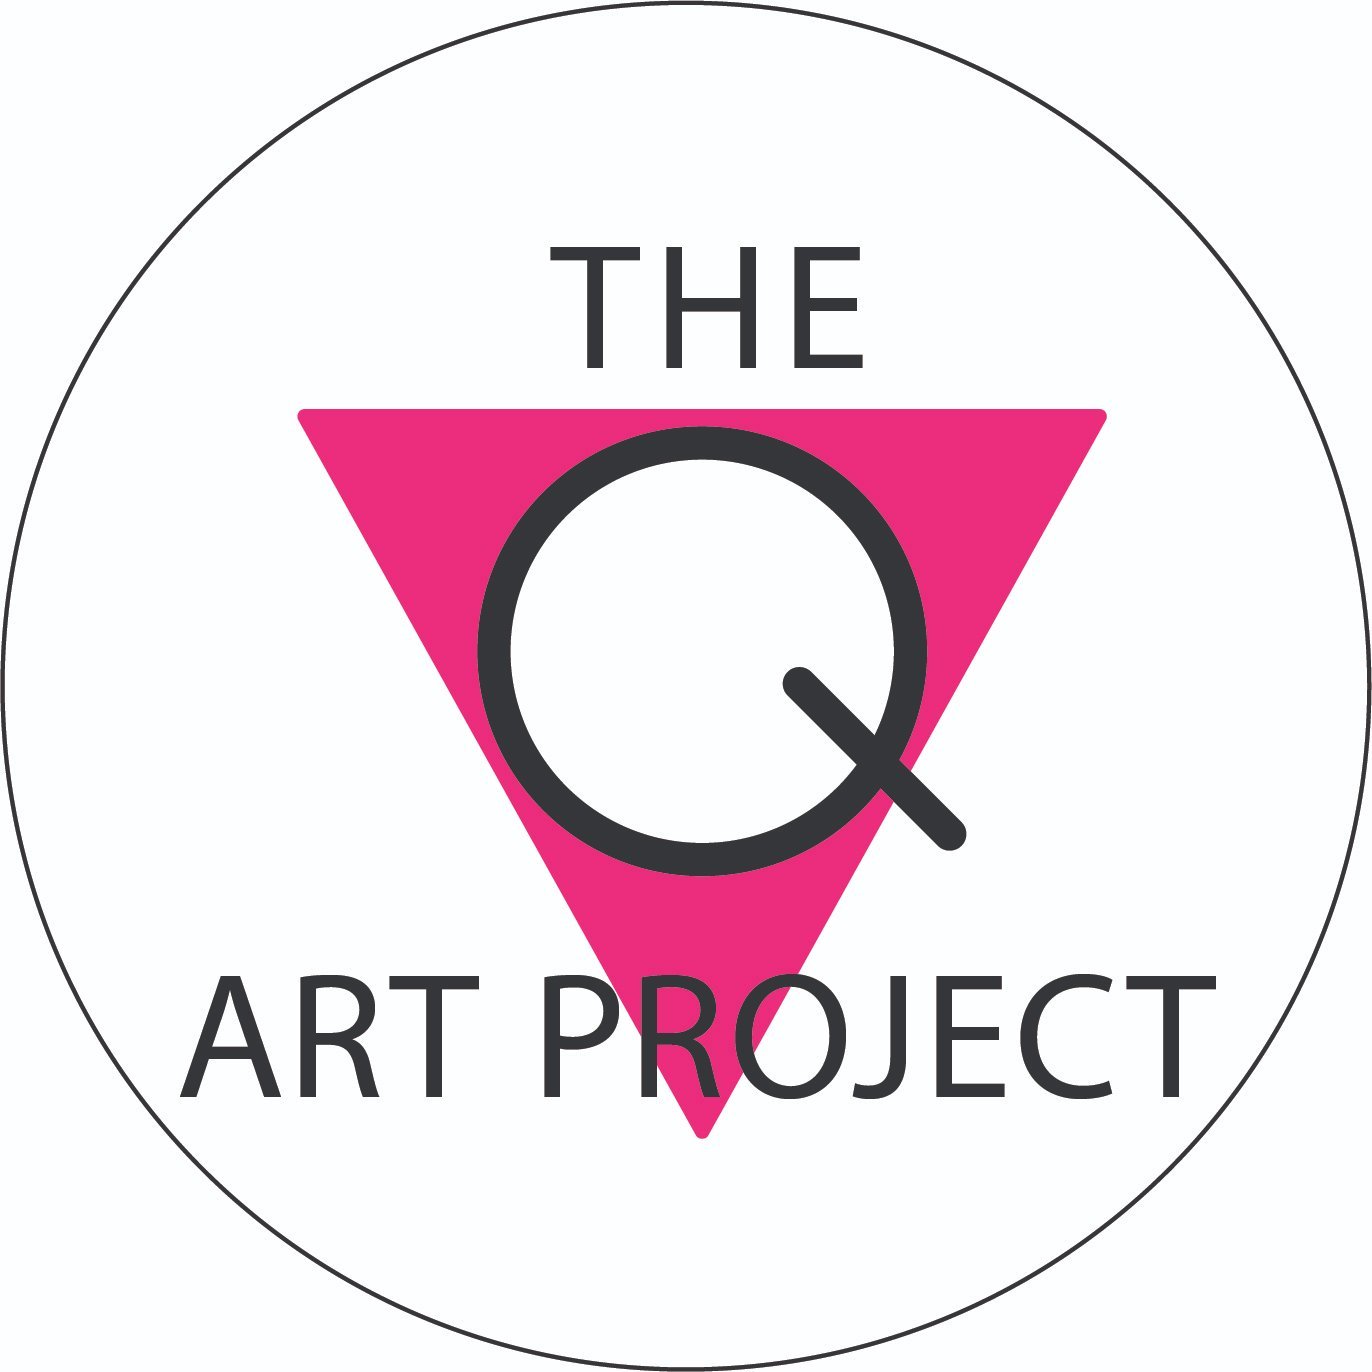 An up and coming Queer art space in Saugatuck, MI